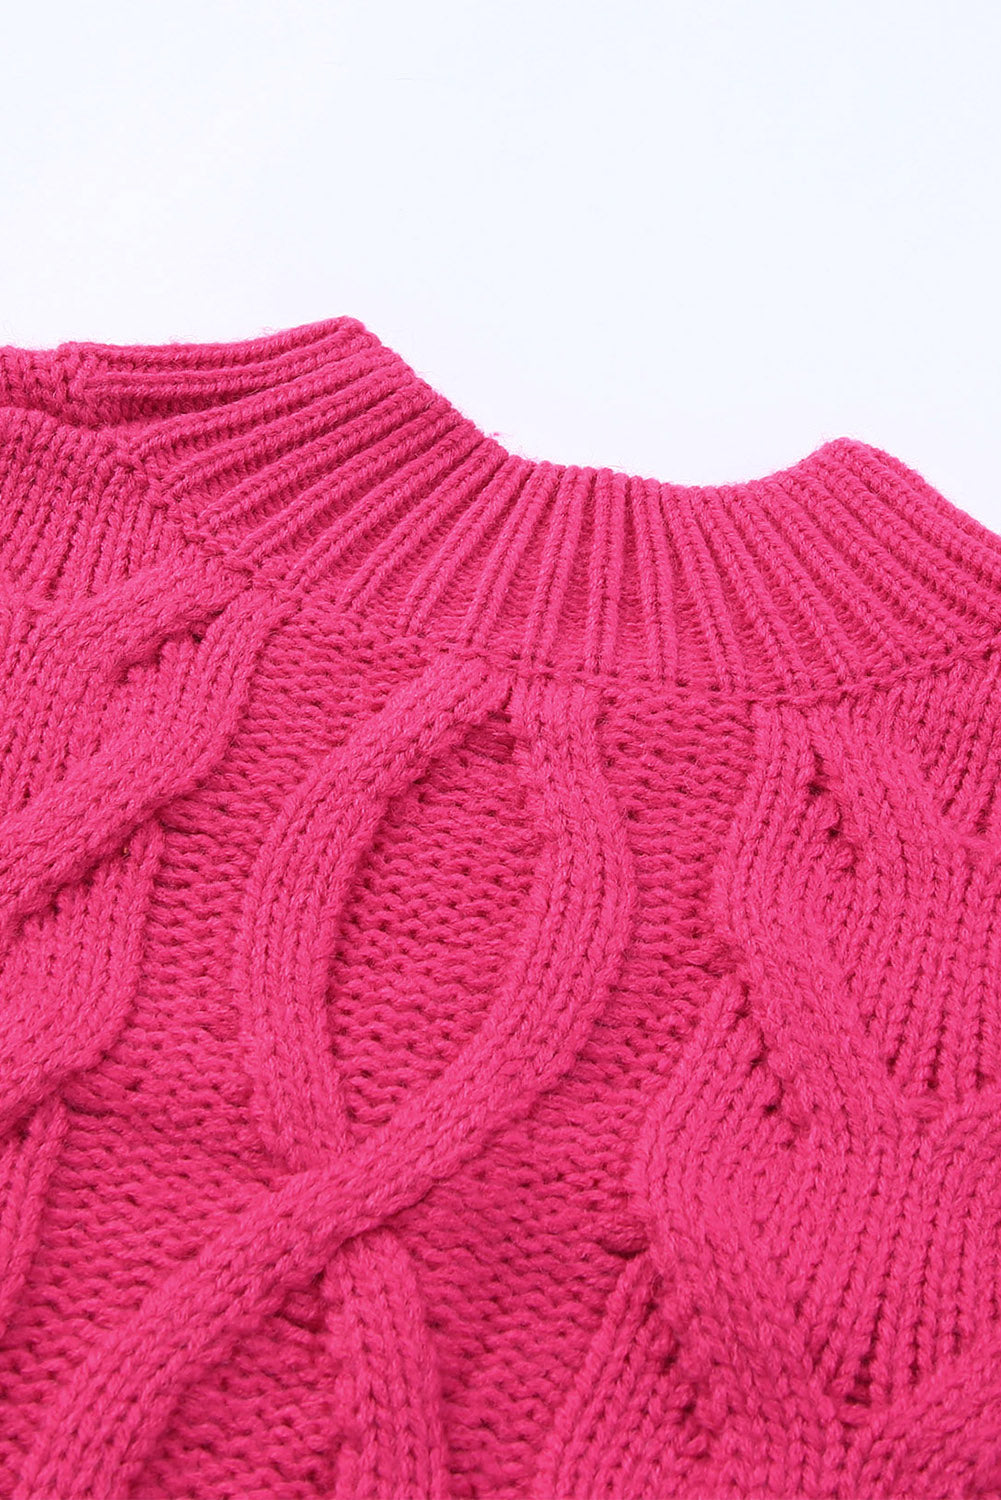 Rose High Neck Cable Knit Tasseled Sweater